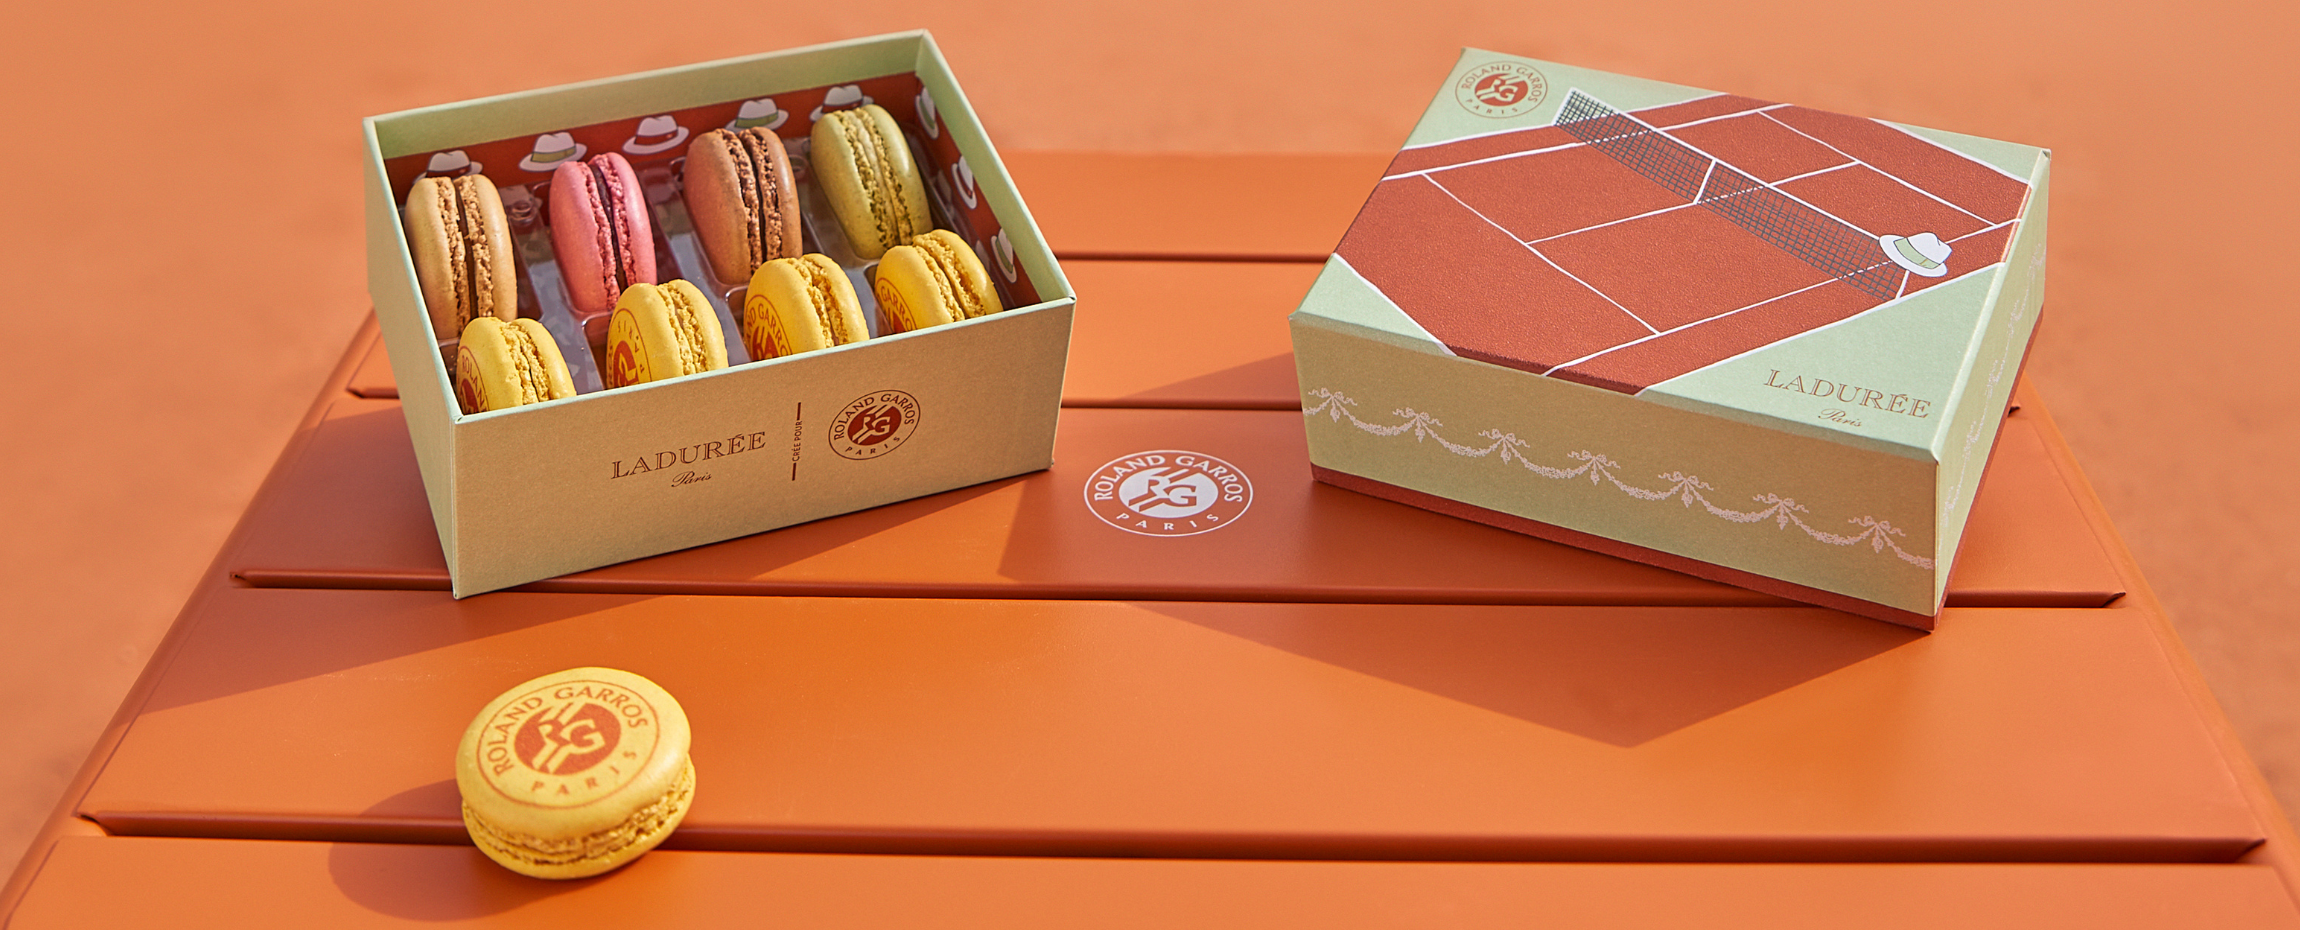 A box with the Roland Garros colors